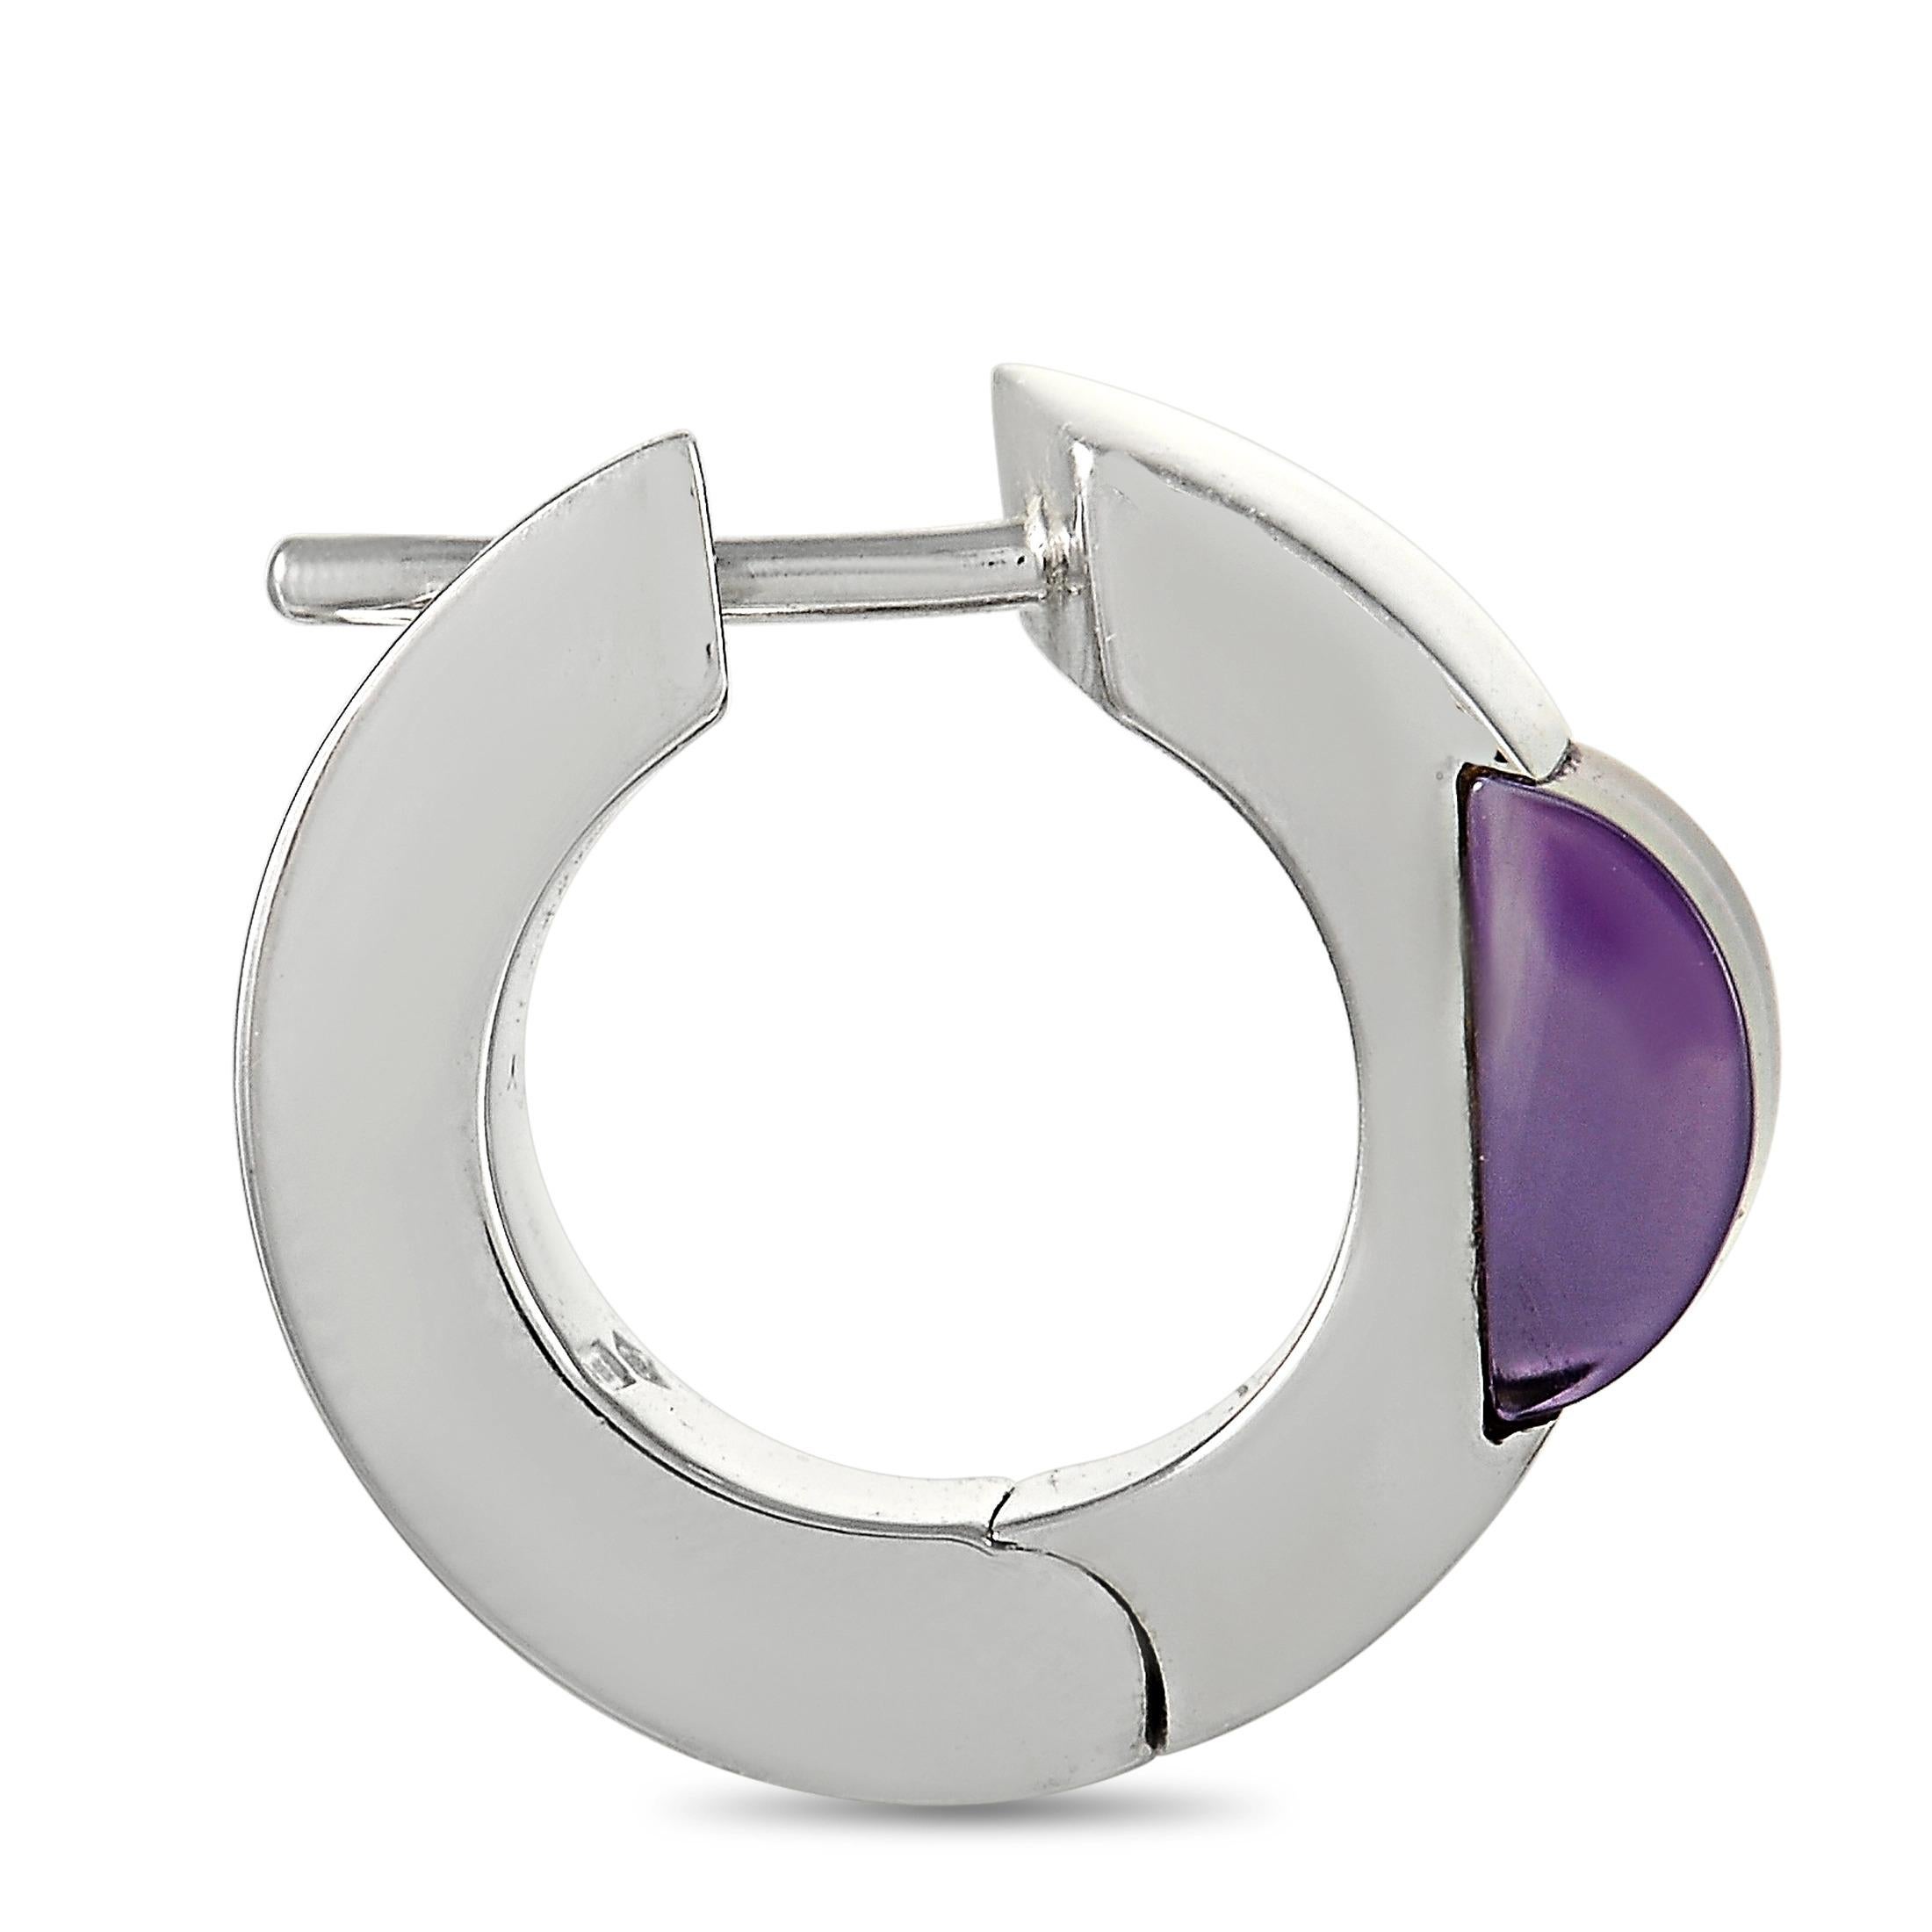 These stylish earrings from Gucci possess a bold design and a commanding presence. Each one is crafted from shimmering 18K White Gold and measures 0.65” long by 0.5” wide. At the center, a square-cut Amethyst gemstone adds a pop of color to this